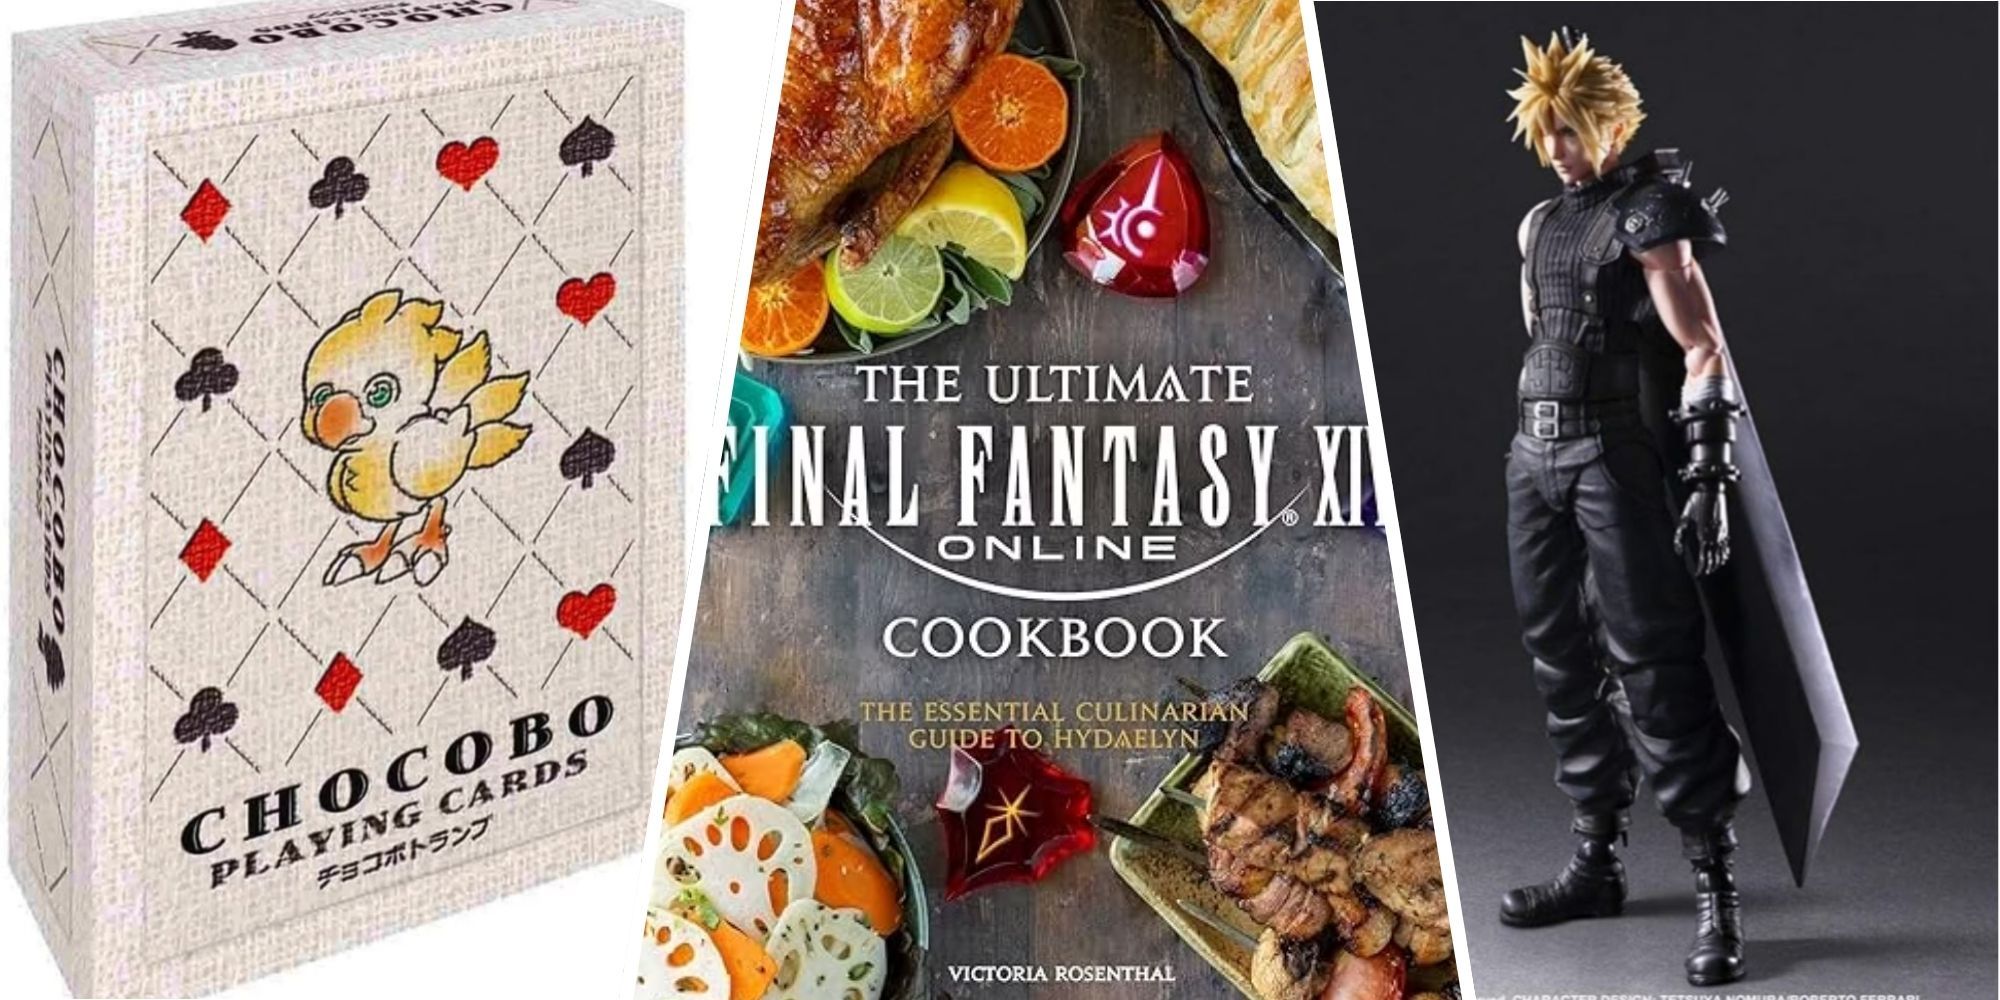 Chocobo playing cards FF 14 cookbook and Cloud action figure